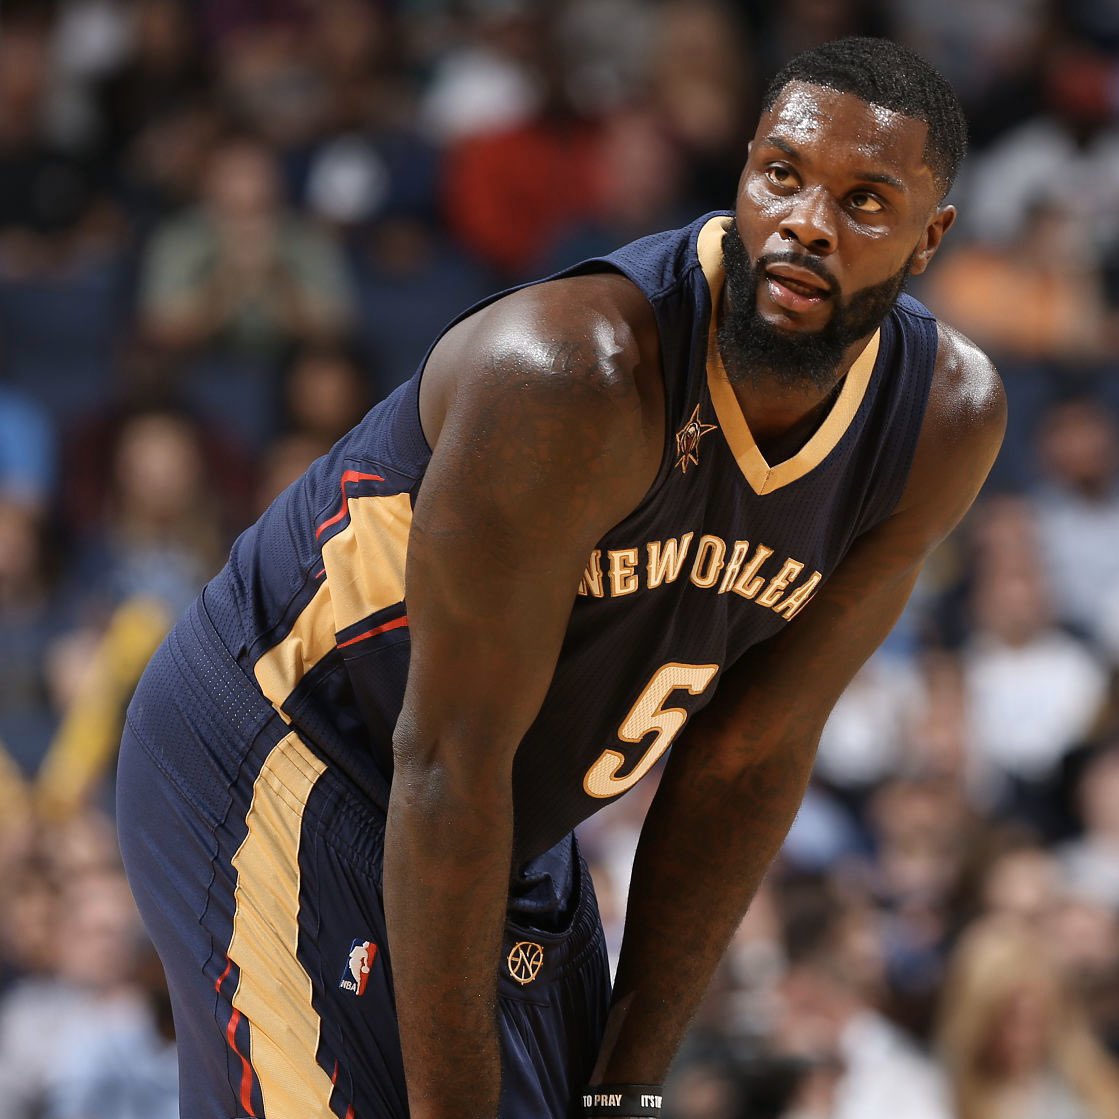 I kind of forgot that in two  #NBA   seasons (2015-2017), Lance Stephenson played for the:Clippers (43 games)Grizzlies (30 games)Pelicans (6 games)Timberwolves (6 games)Pacers (10 games)